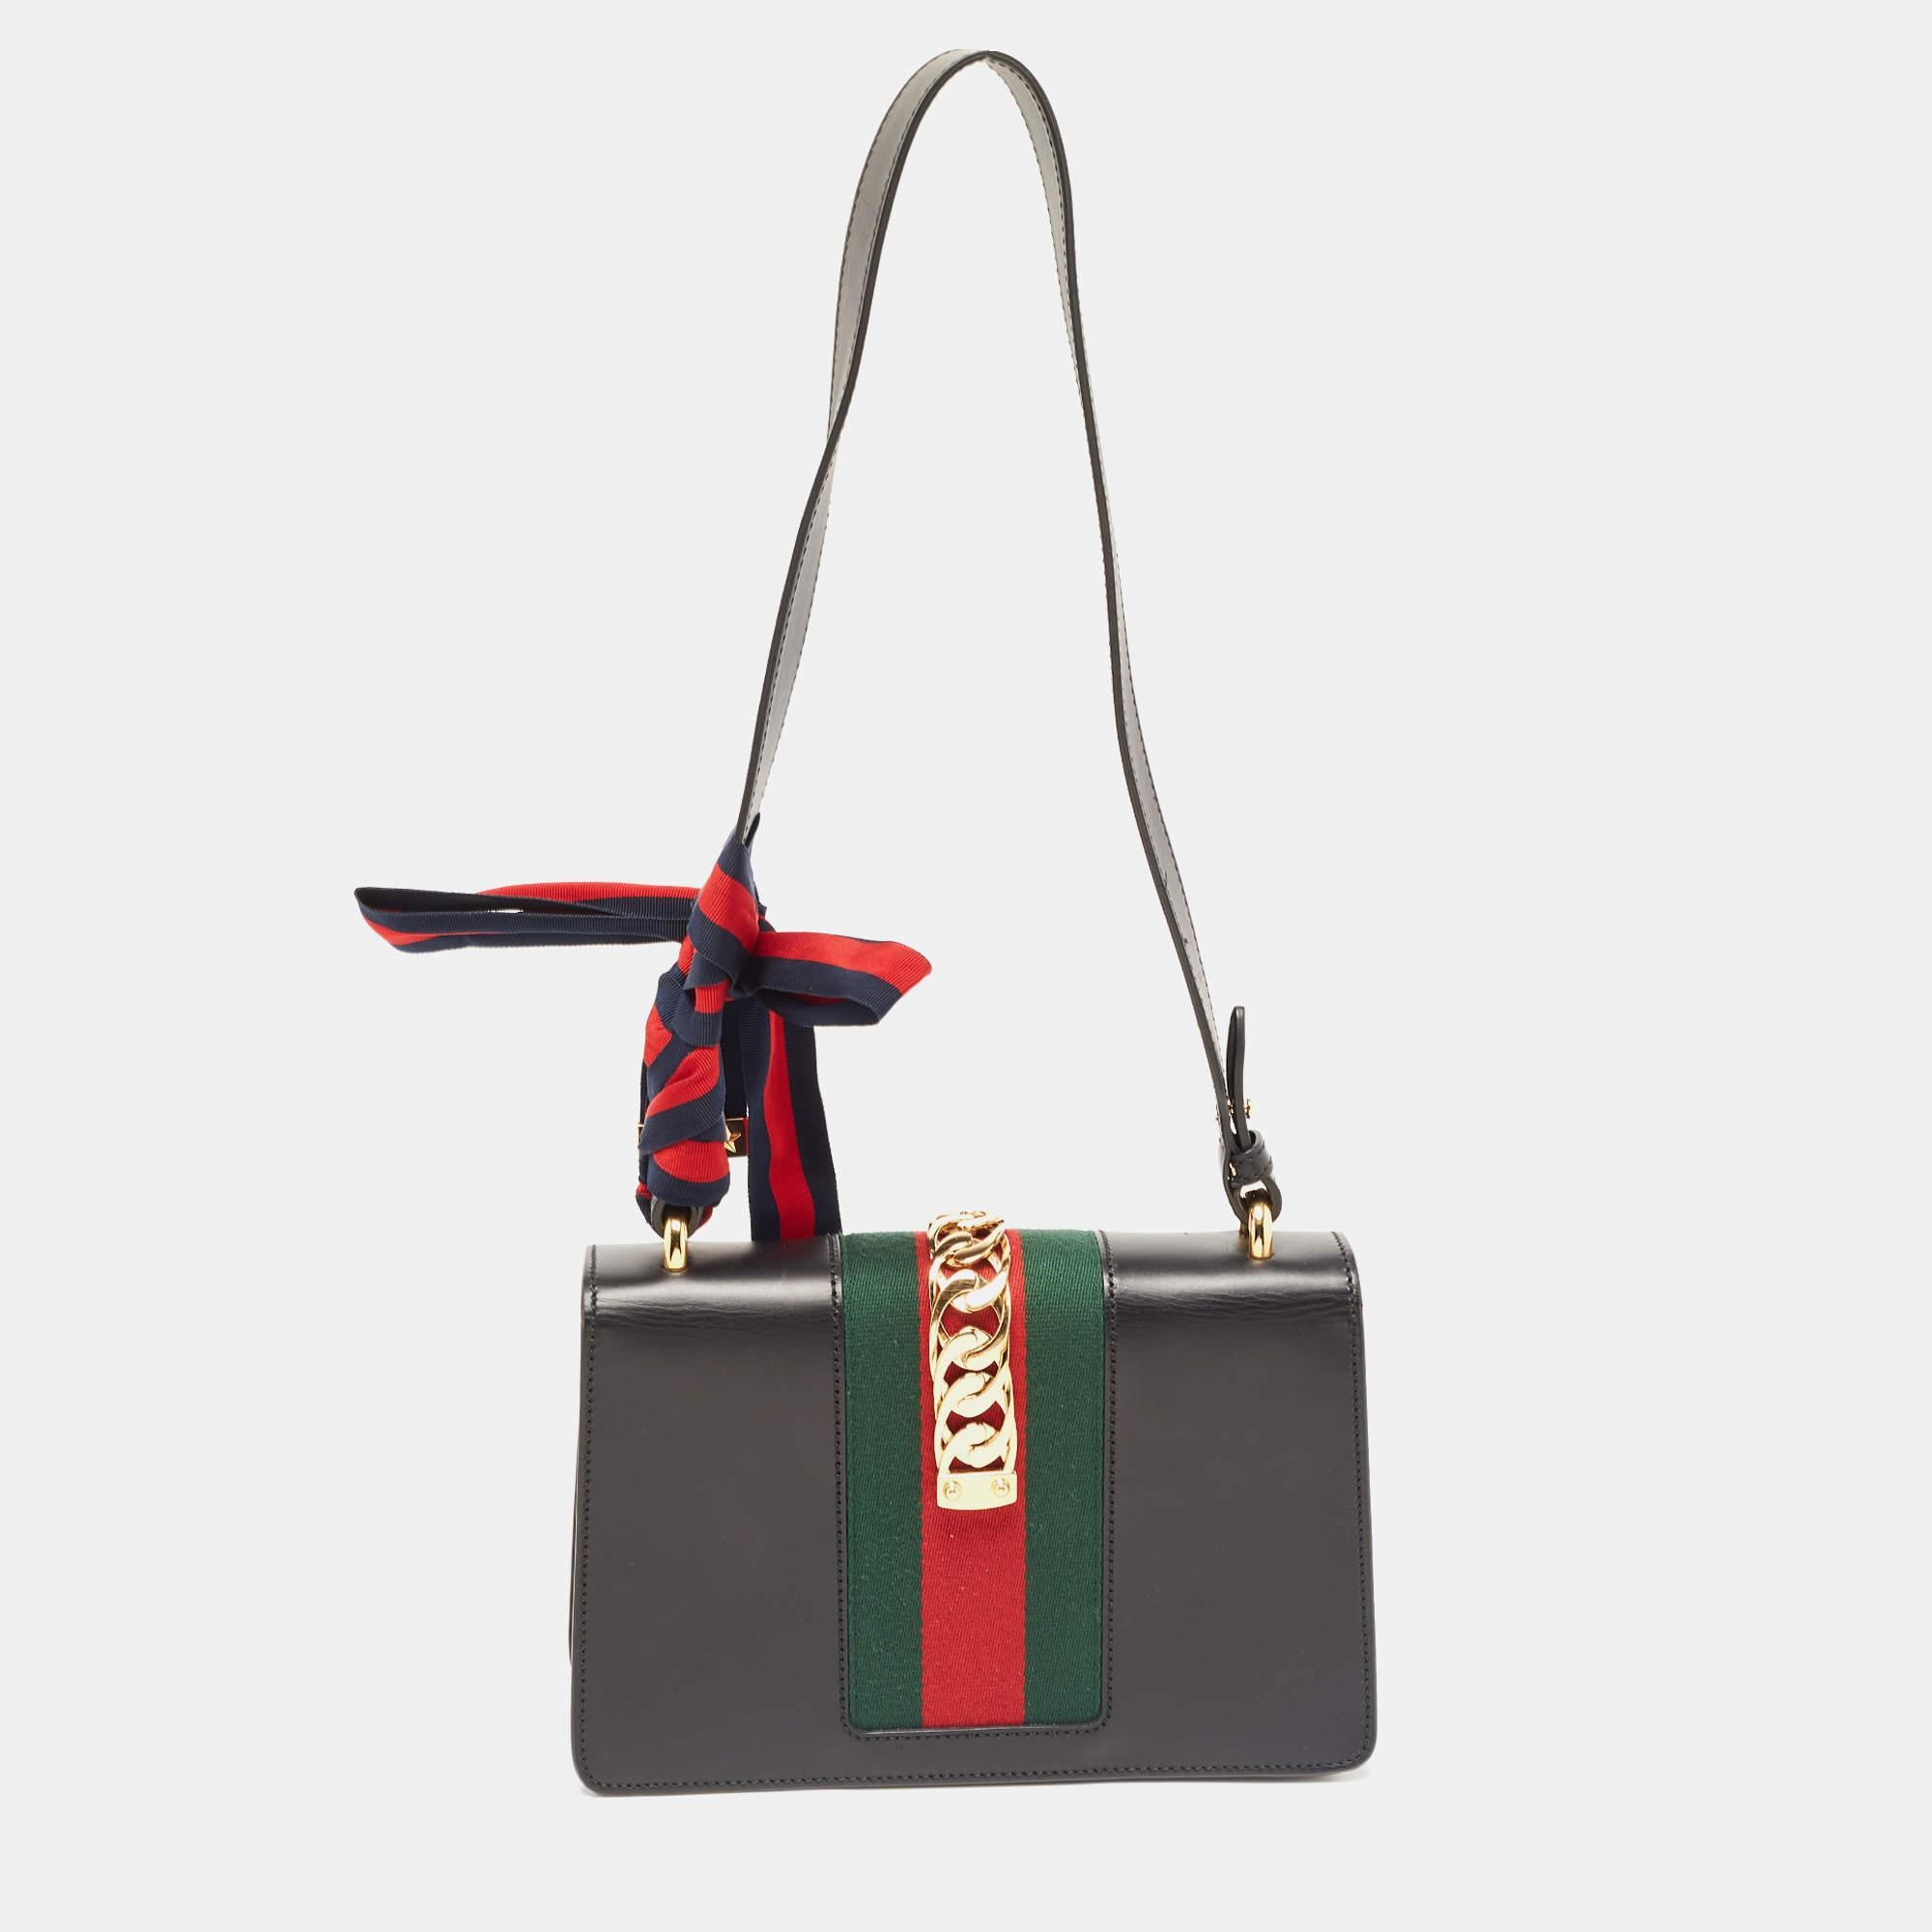 All the designs from Gucci, like this Sylvie bag, reflect a sense of innovation and tradition. Crafted from leather with a brand signature all over, it is admired for its alluring finish. The dual carrying options make it practical, and the